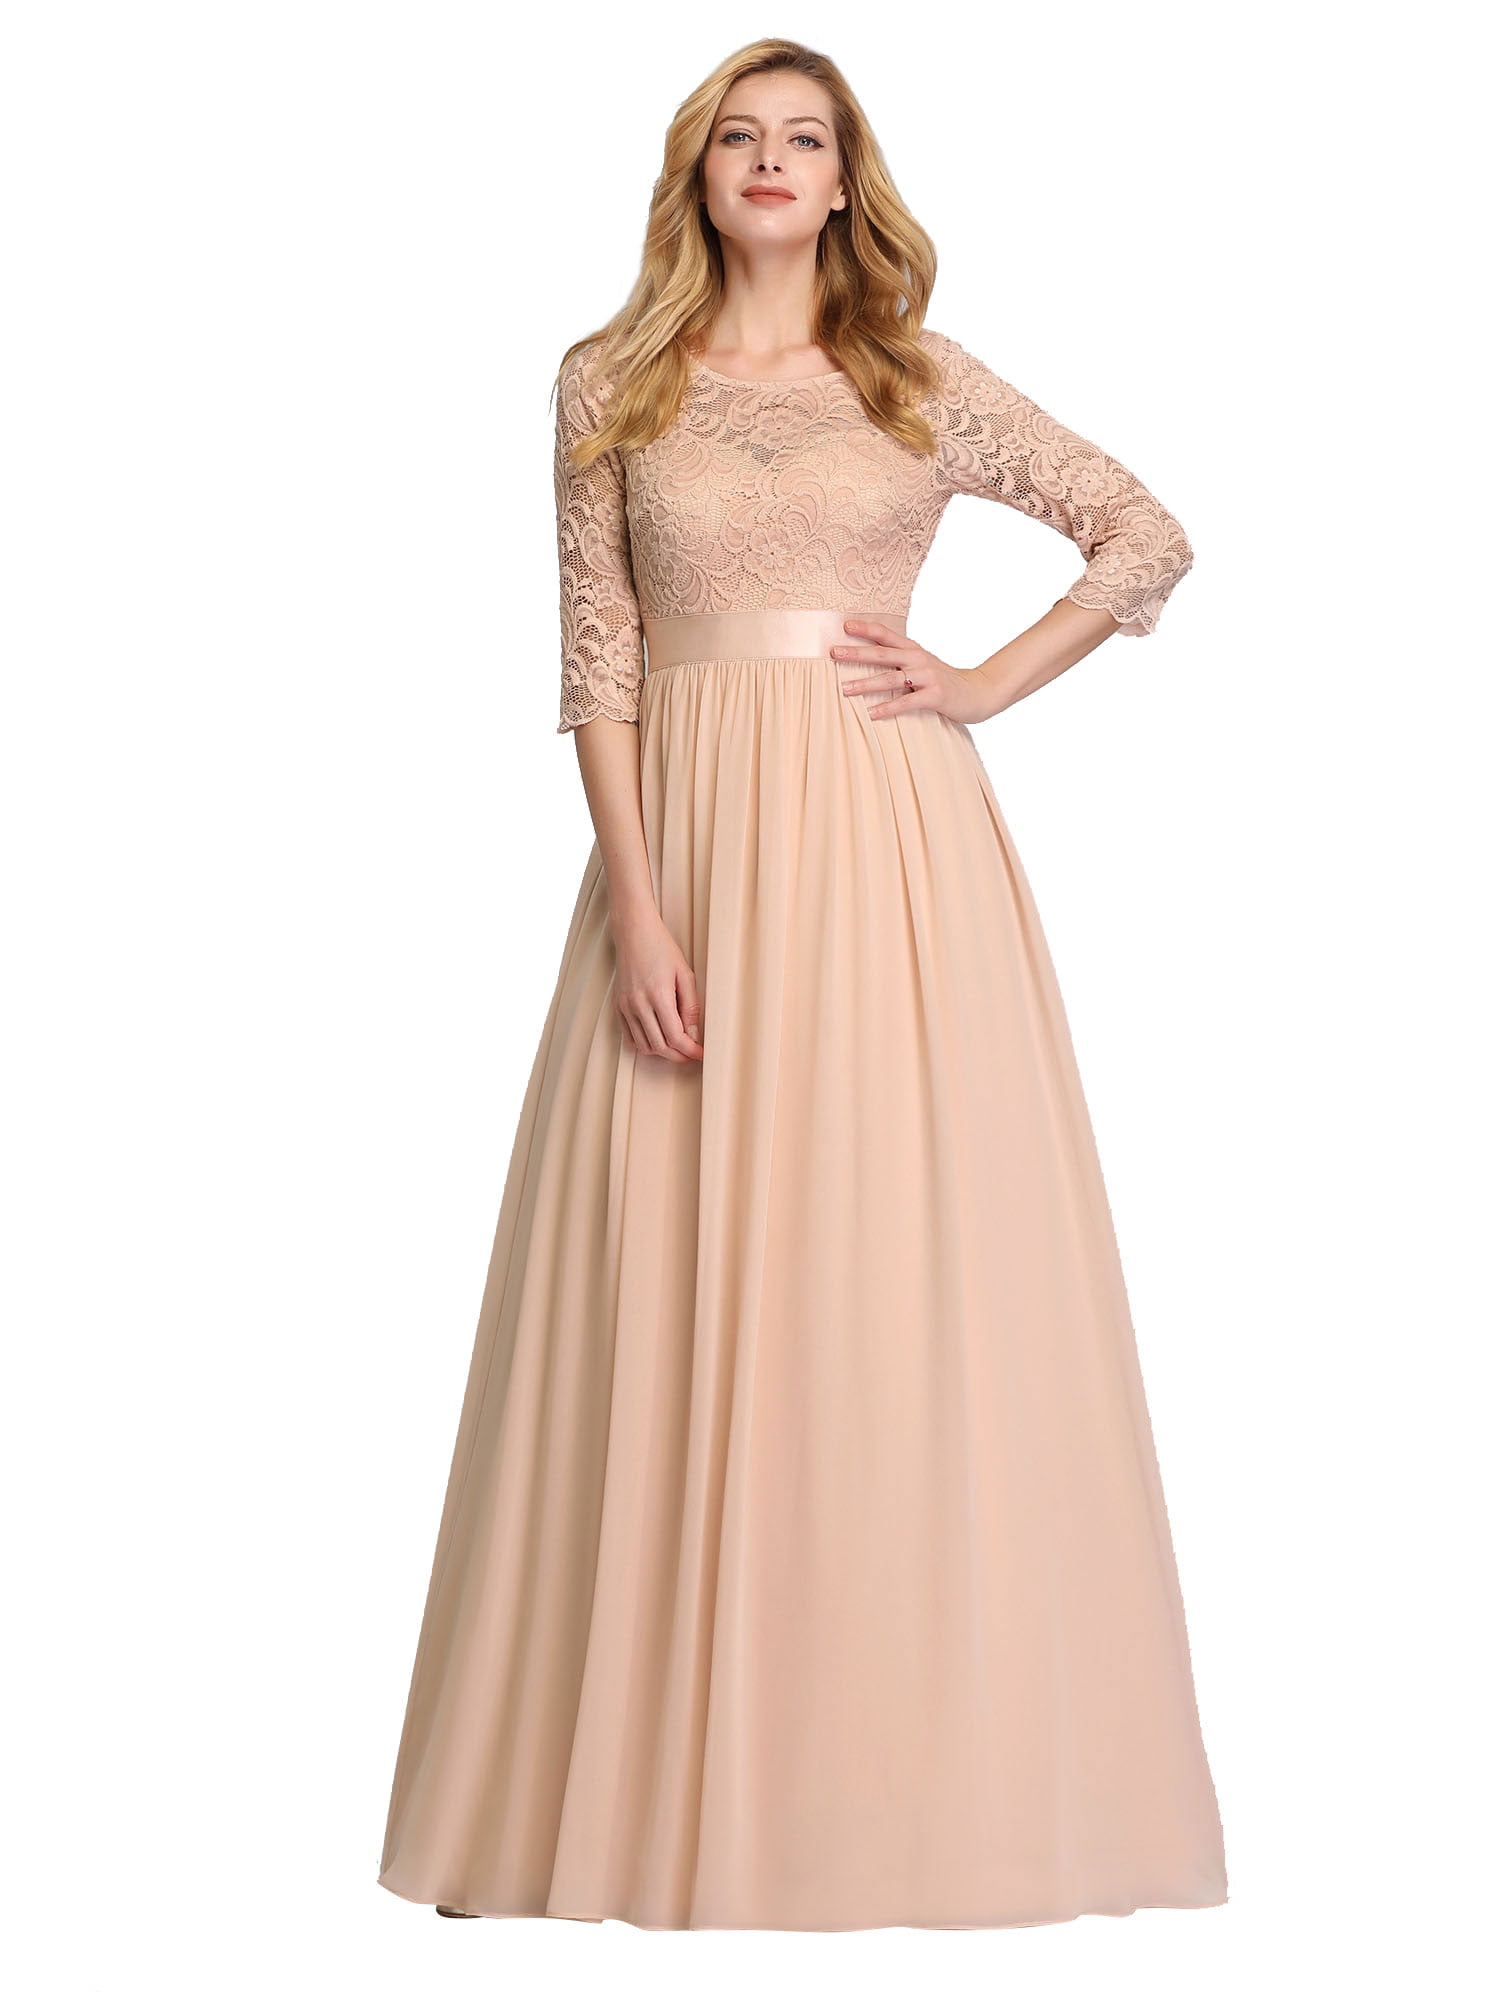 Ever-pretty - Ever-Pretty Womens Floral Lace Long Bridesmaid Dresses for Women 74123 Blush US4